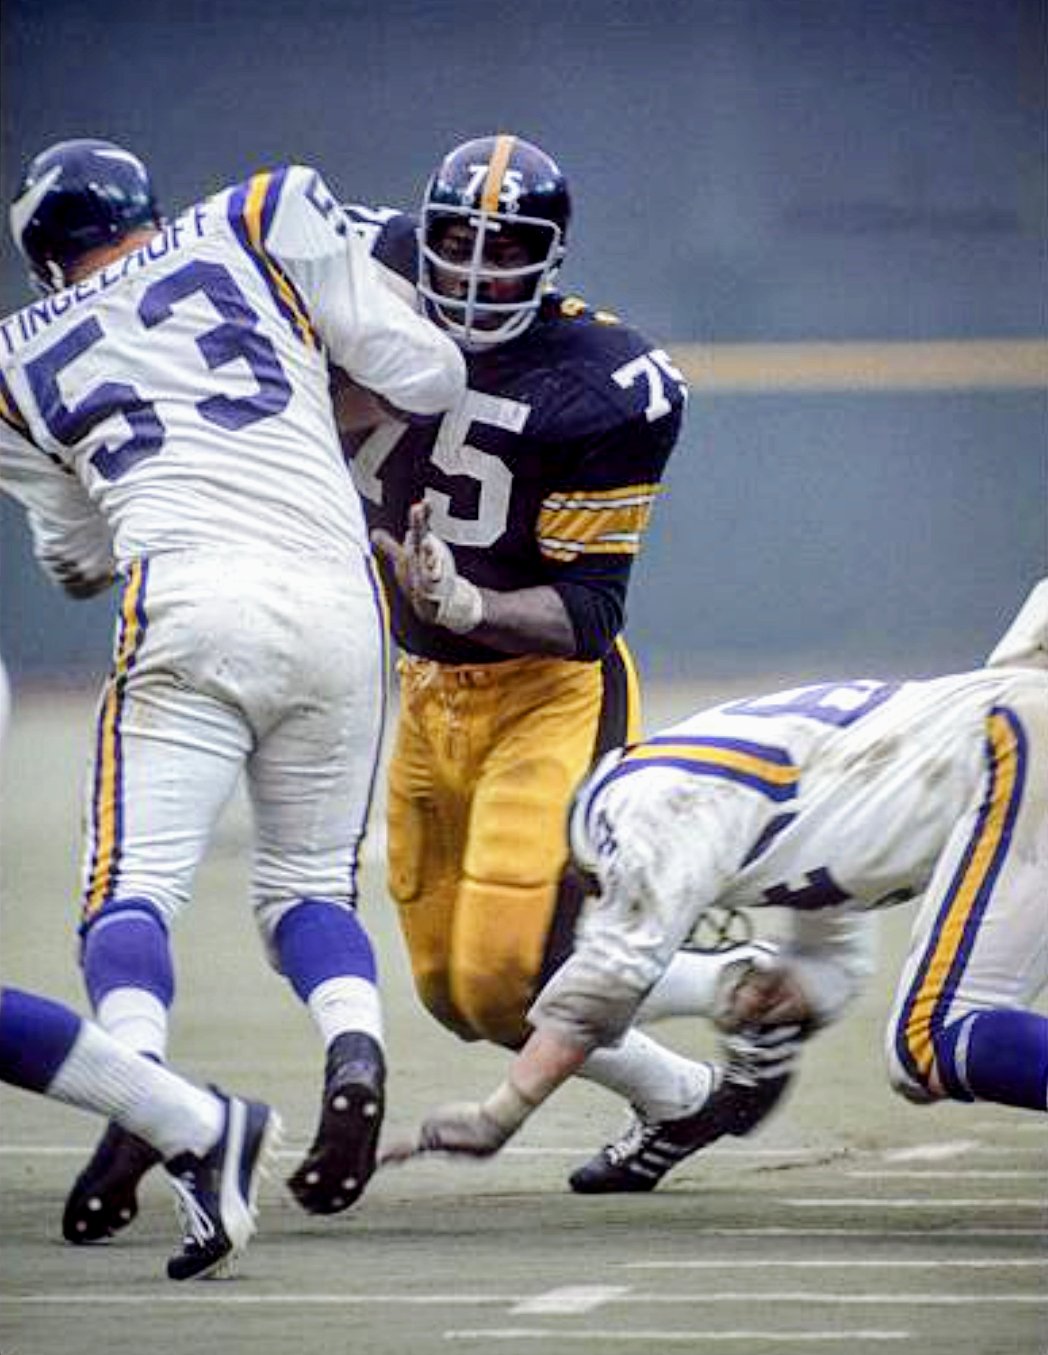 Kevin Gallagher on X: 'PFHOFers Mick Tingelhoff and Mean Joe Greene grapple  as Milt Sunde applies the then-legal high-low chop block, November 1972.  #PITvsMIN #Steelers #Vikings  / X